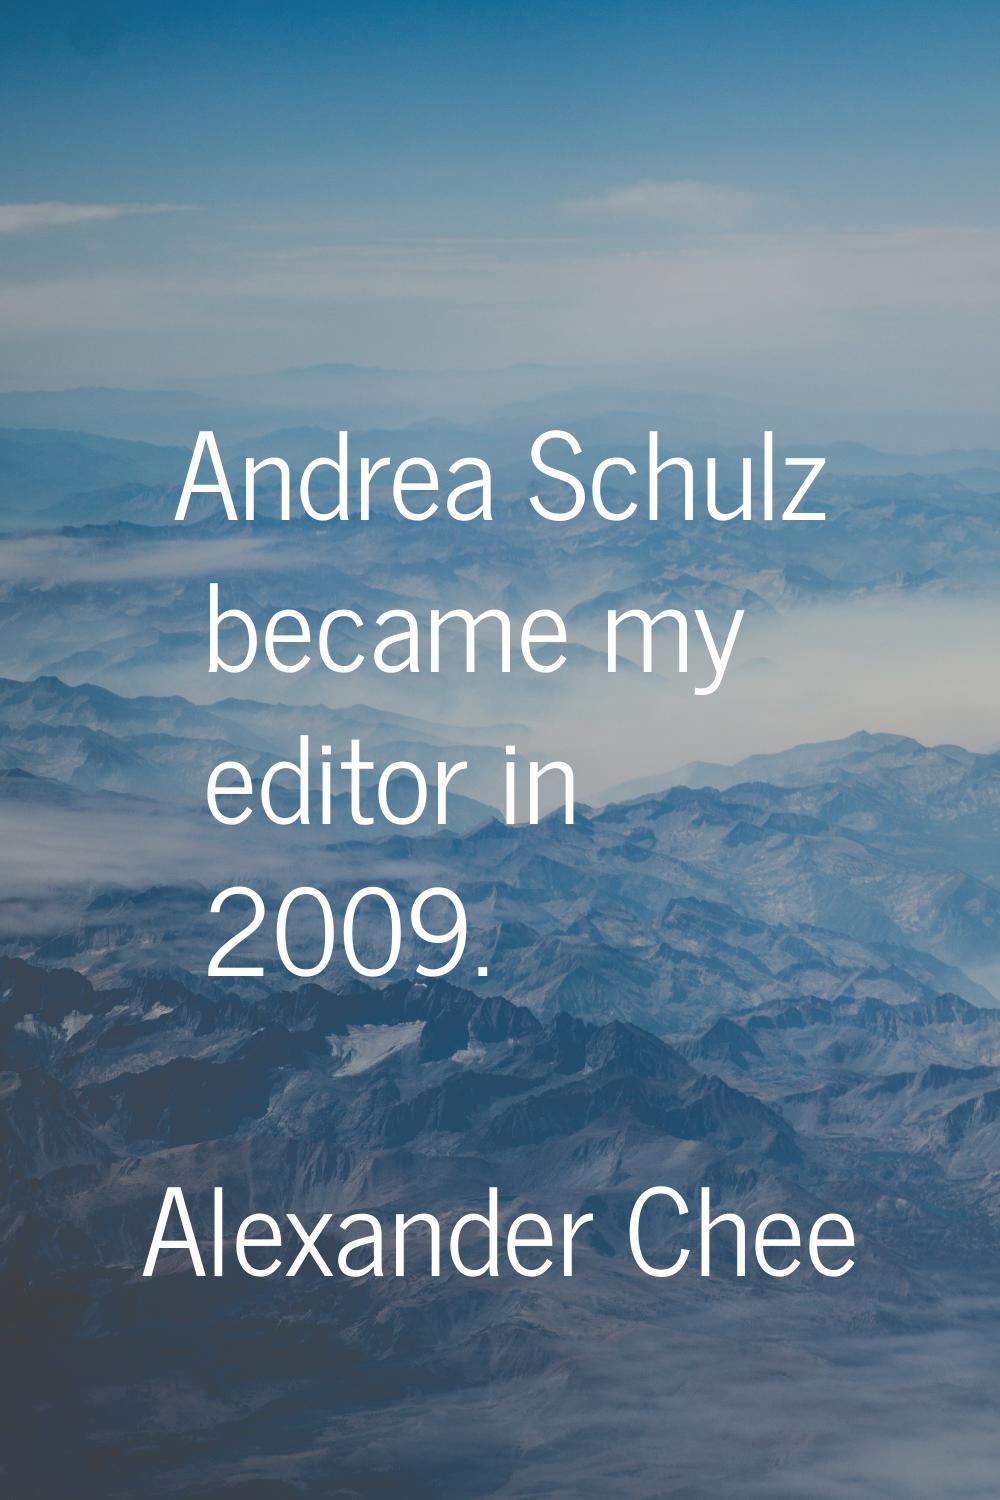 Andrea Schulz became my editor in 2009.